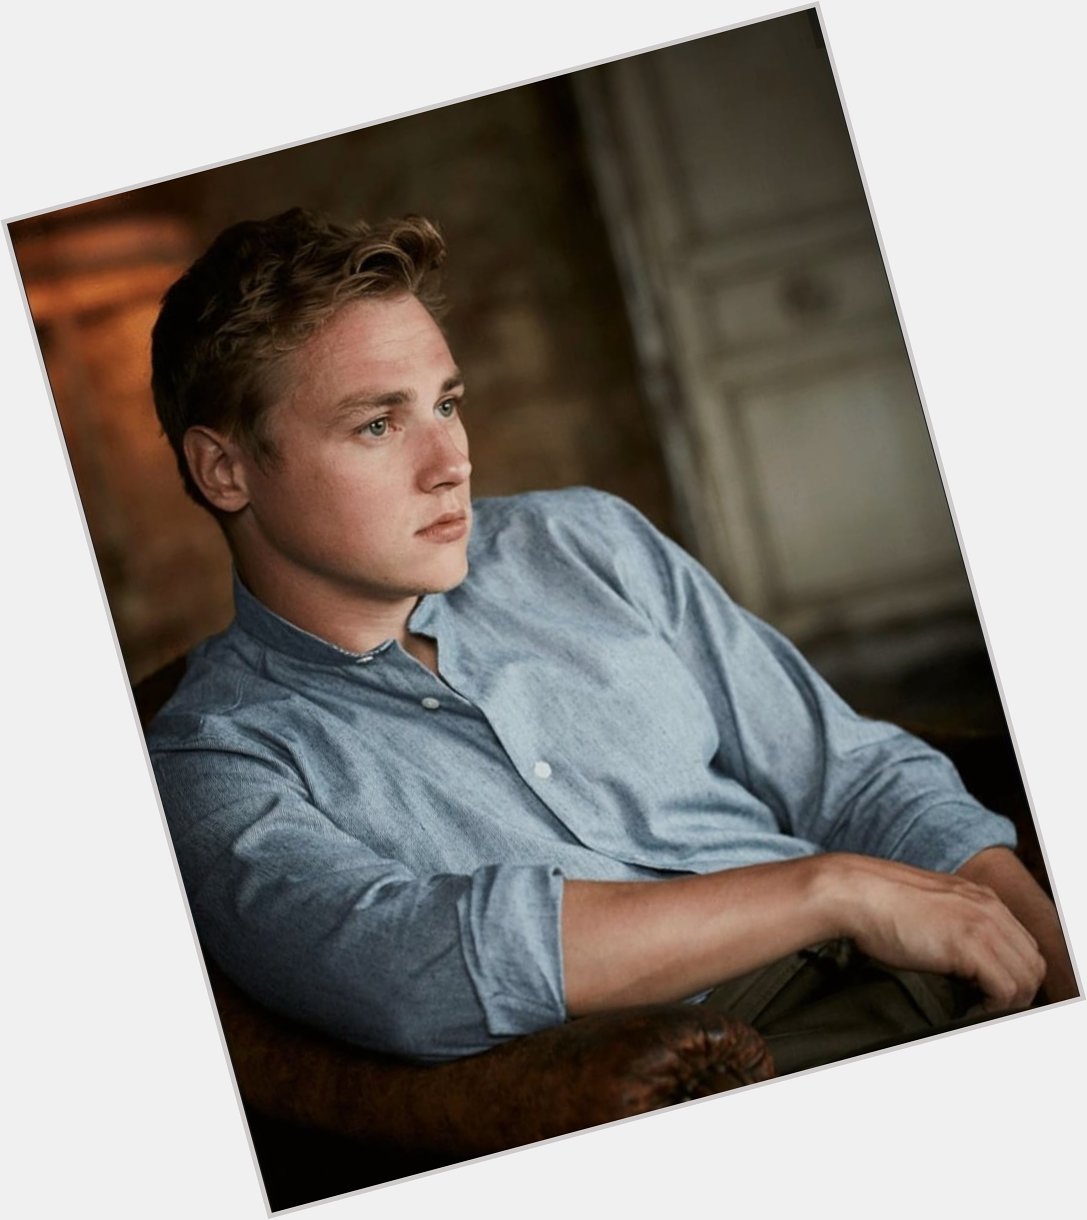 So somebody is now 29 years old. 1991 was a great year, so...

HAPPY BIRTHDAY BEN HARDY SEU LINDO! 